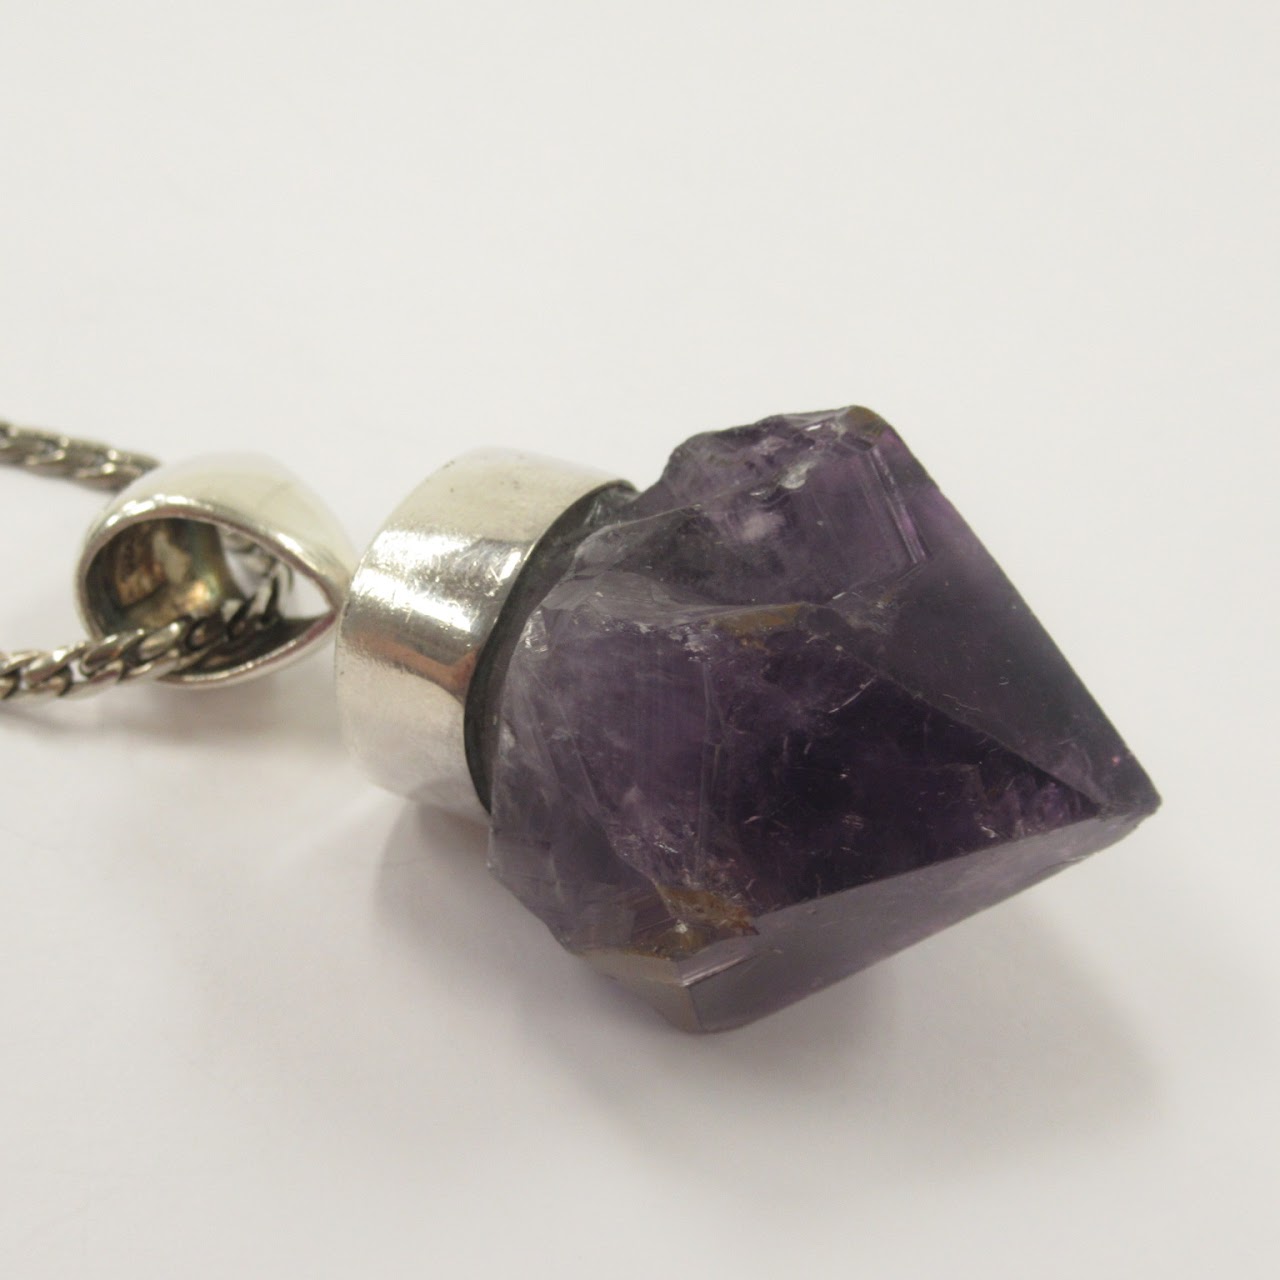 Sterling Silver and Amethyst Chunk Pendant Necklace